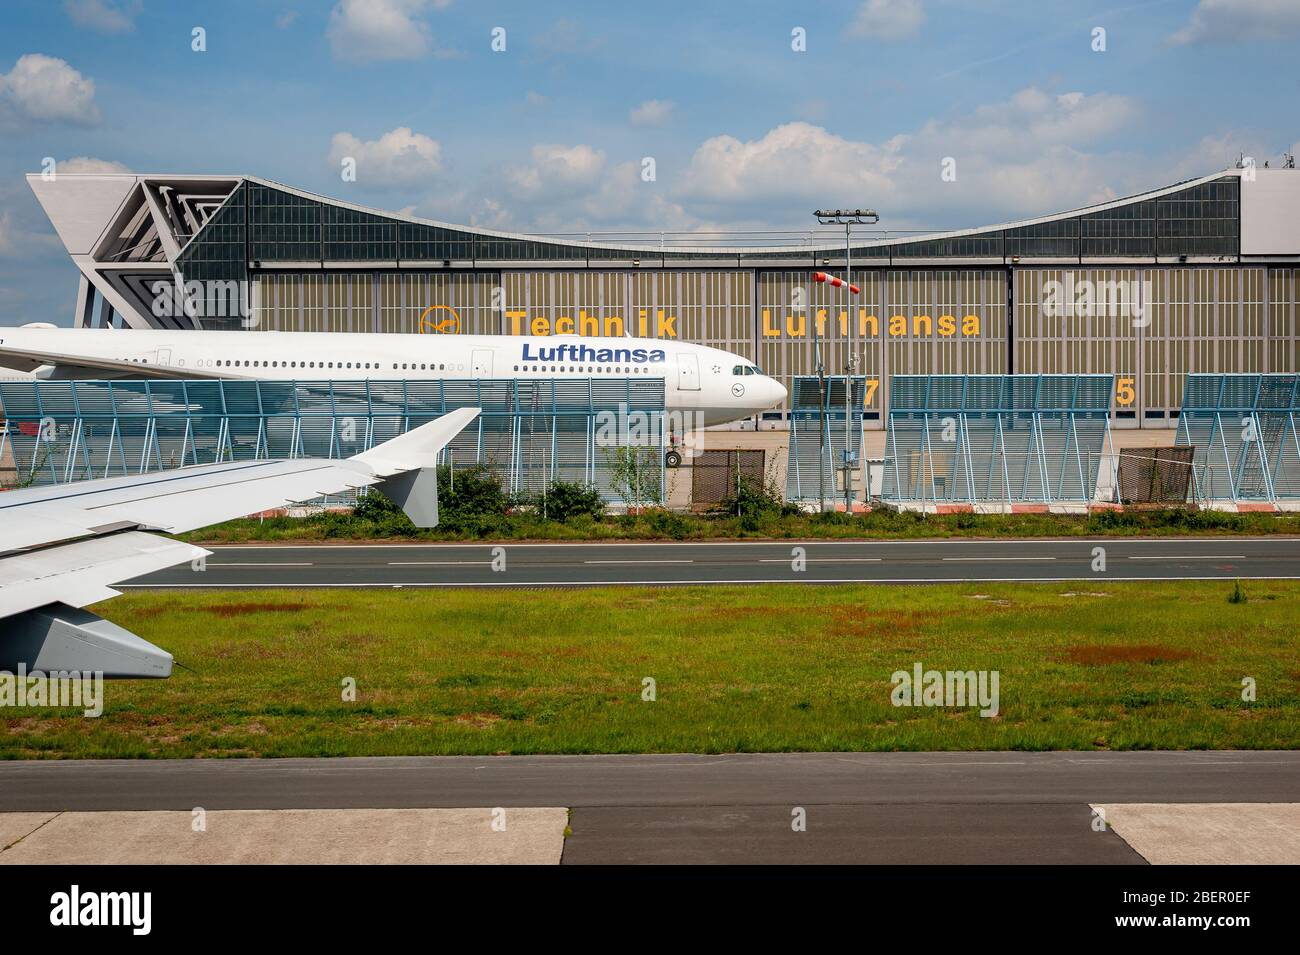 05/26/2019. Frankfurt Airport, Germany. Airbus by Lufthansa Technik maintenance hangar. Operated by Fraport and serves as the main hub for Lufthansa. Stock Photo